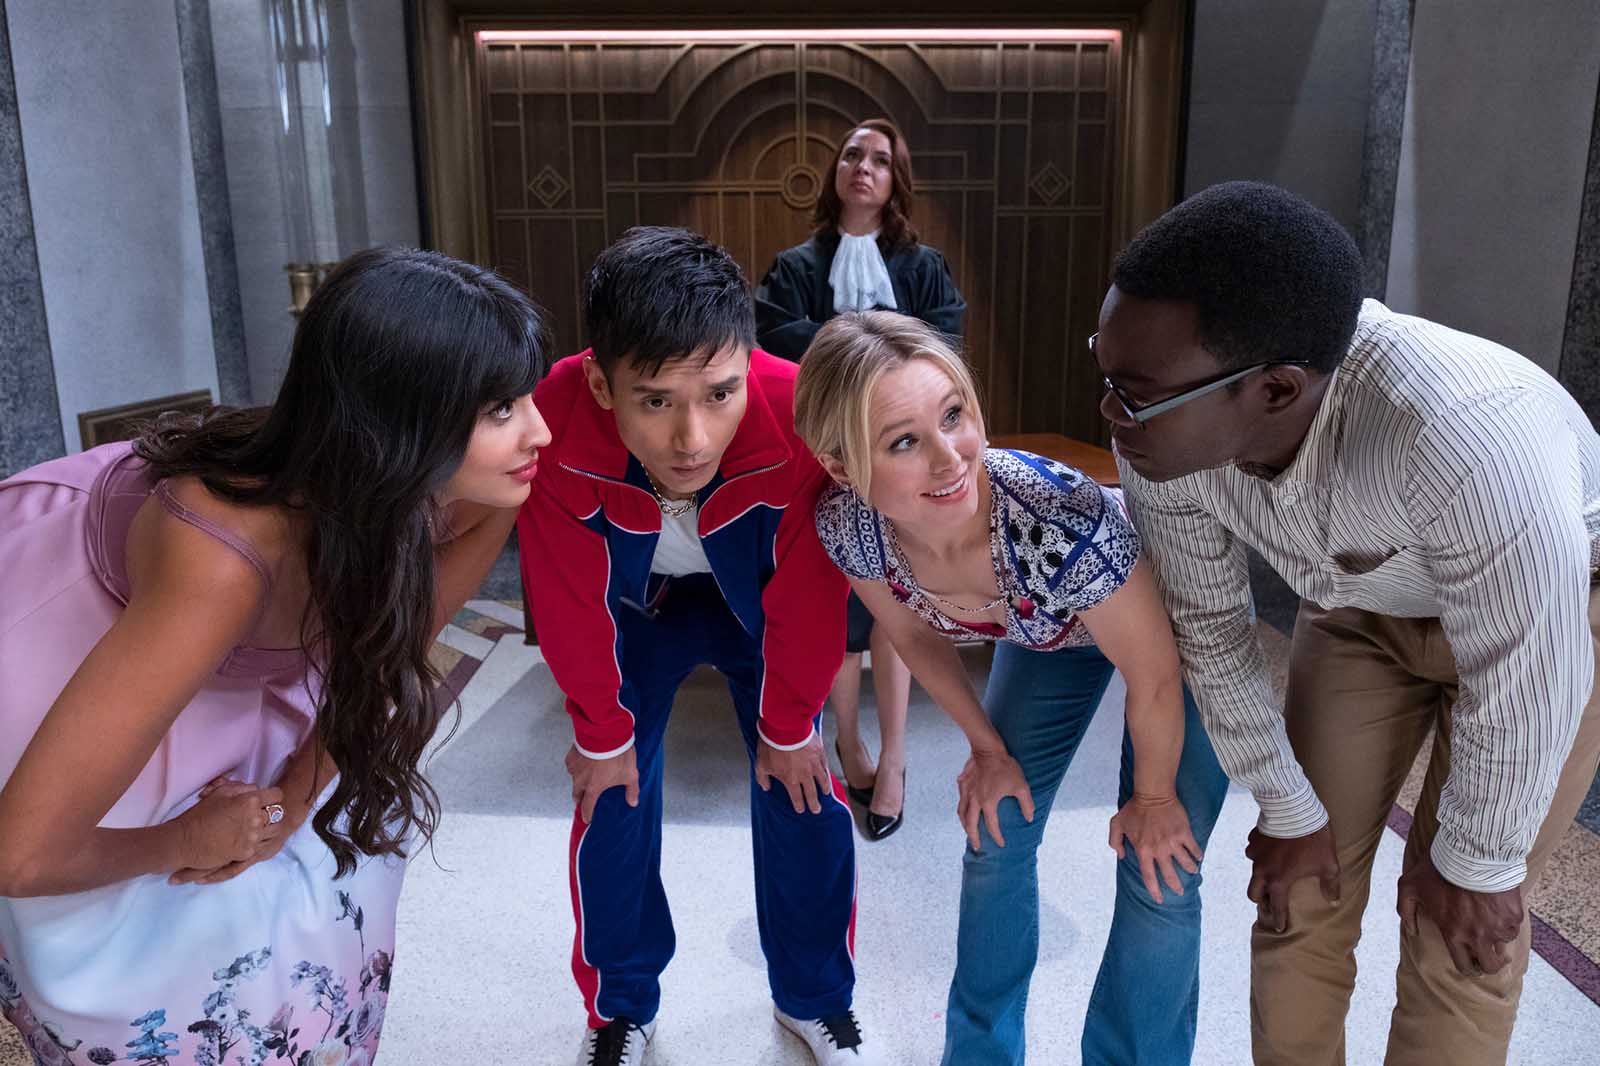 2020 is a mess ya'll, and we're hoping our dear "Soul Squad" can save us all. Mainly, the squad that helped save the world in 'The Good Place' season 3.